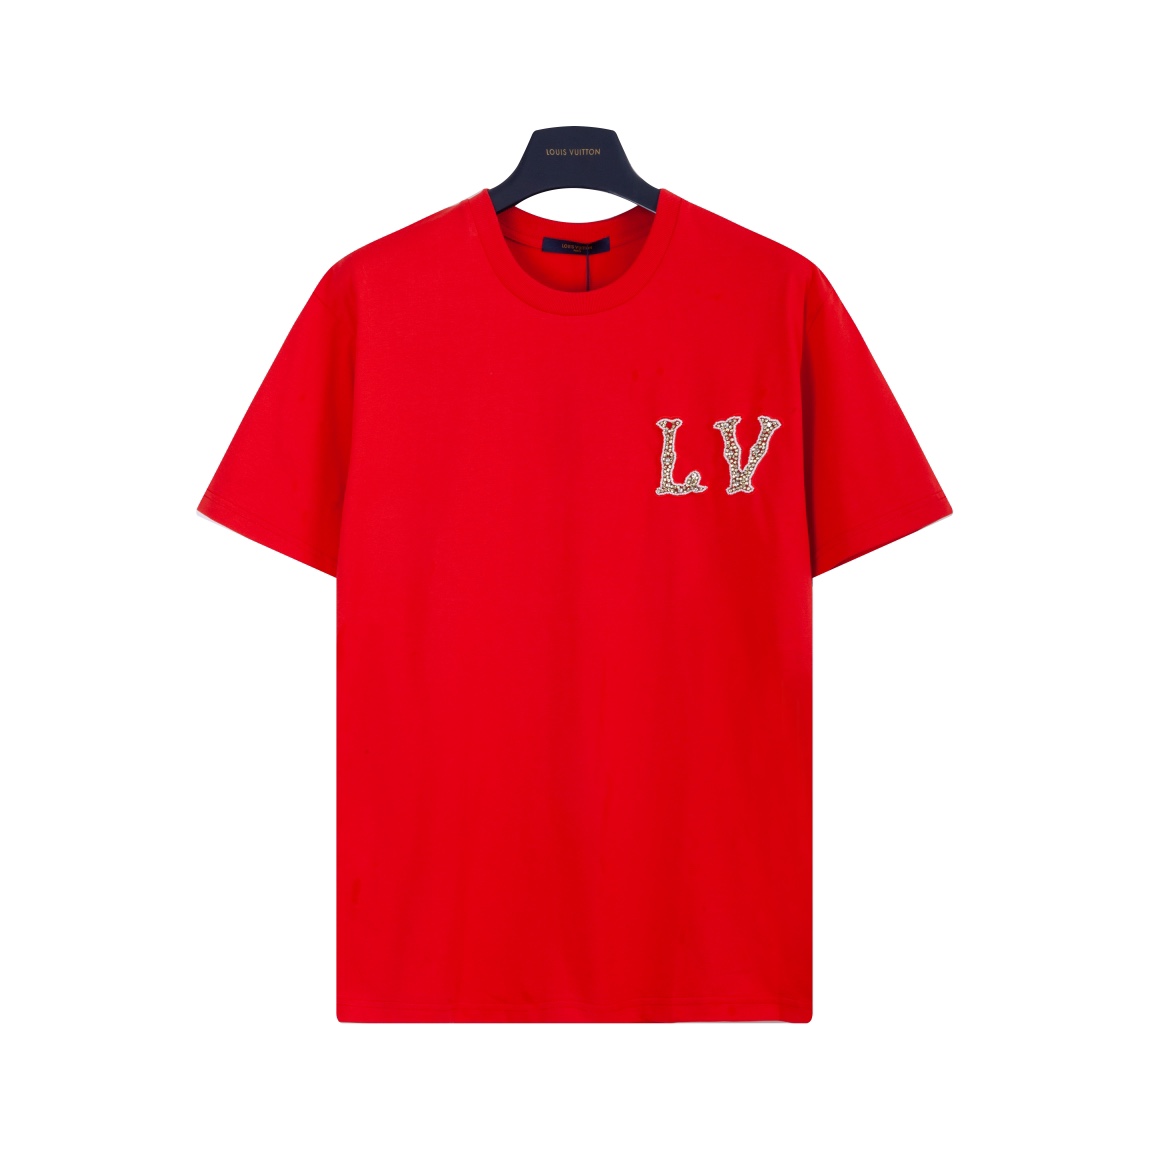 Louis Vuitton Clothing T-Shirt Red Embroidery Unisex Cotton Spring/Summer Collection Short Sleeve